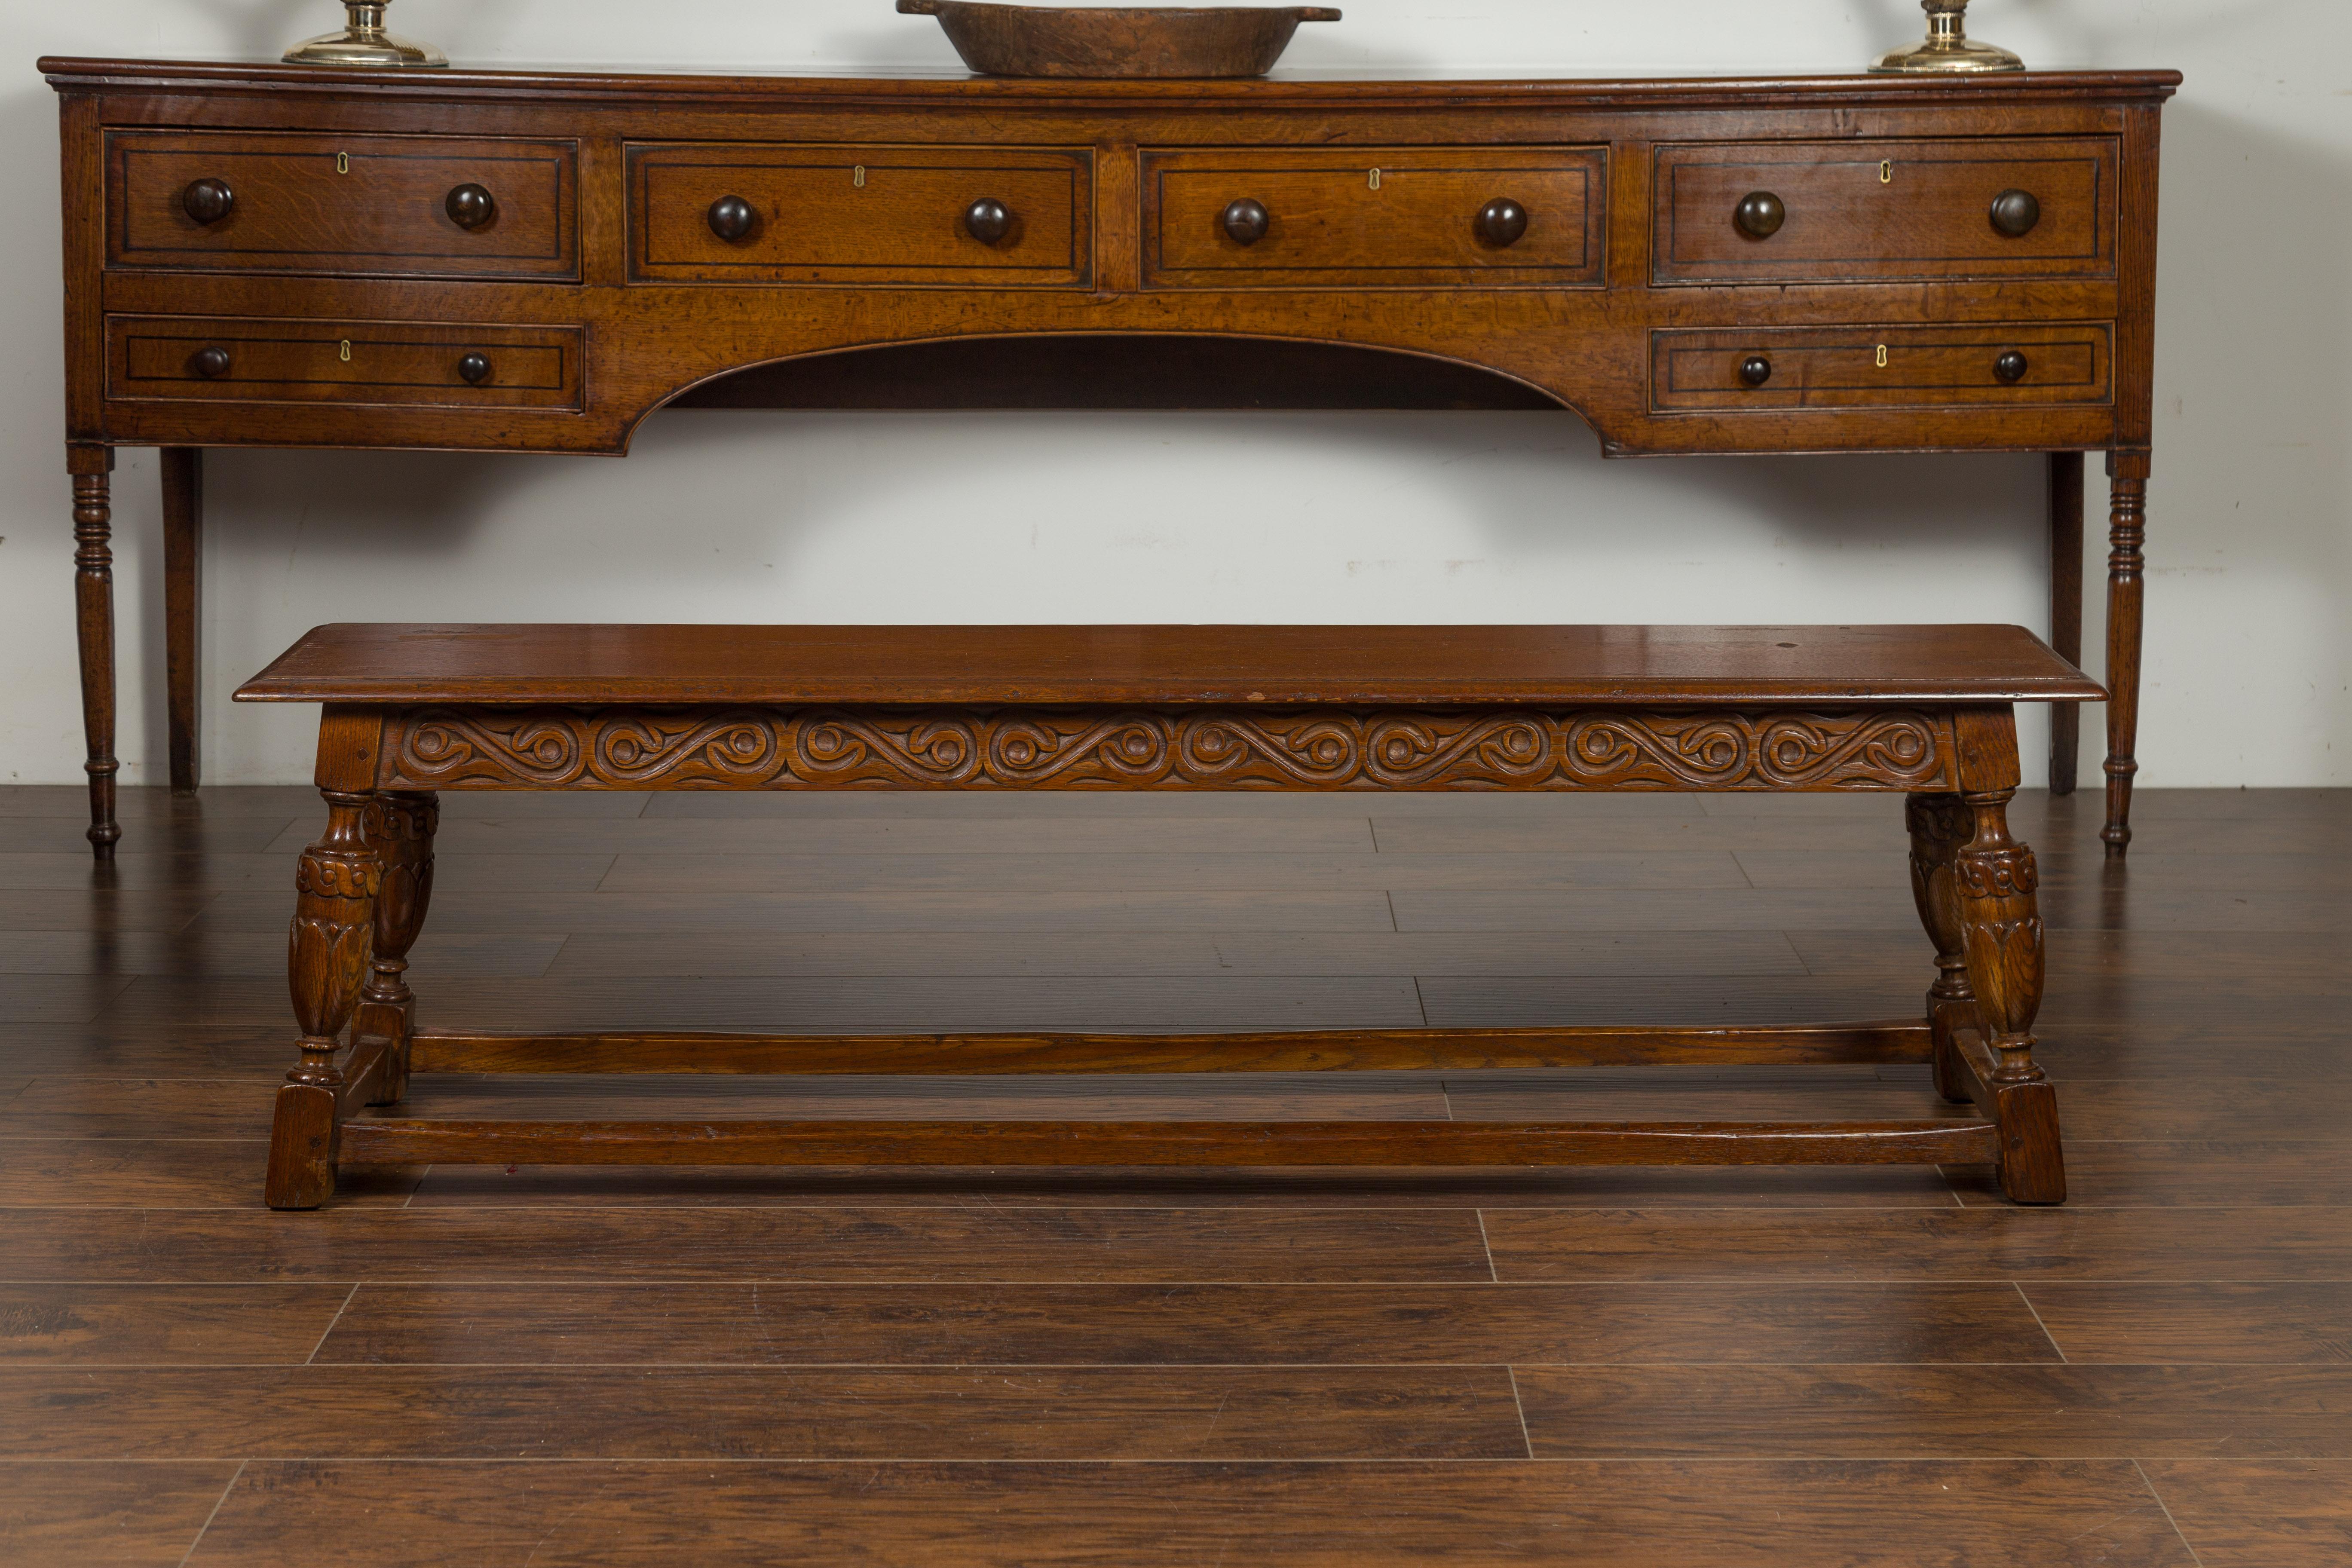 An English oak bench from the early 20th century, with carved apron and legs. Created in England at the turn of the century, this long oak bench features a rectangular top with beveled edges, sitting above an apron carved with scrolls on all sides.